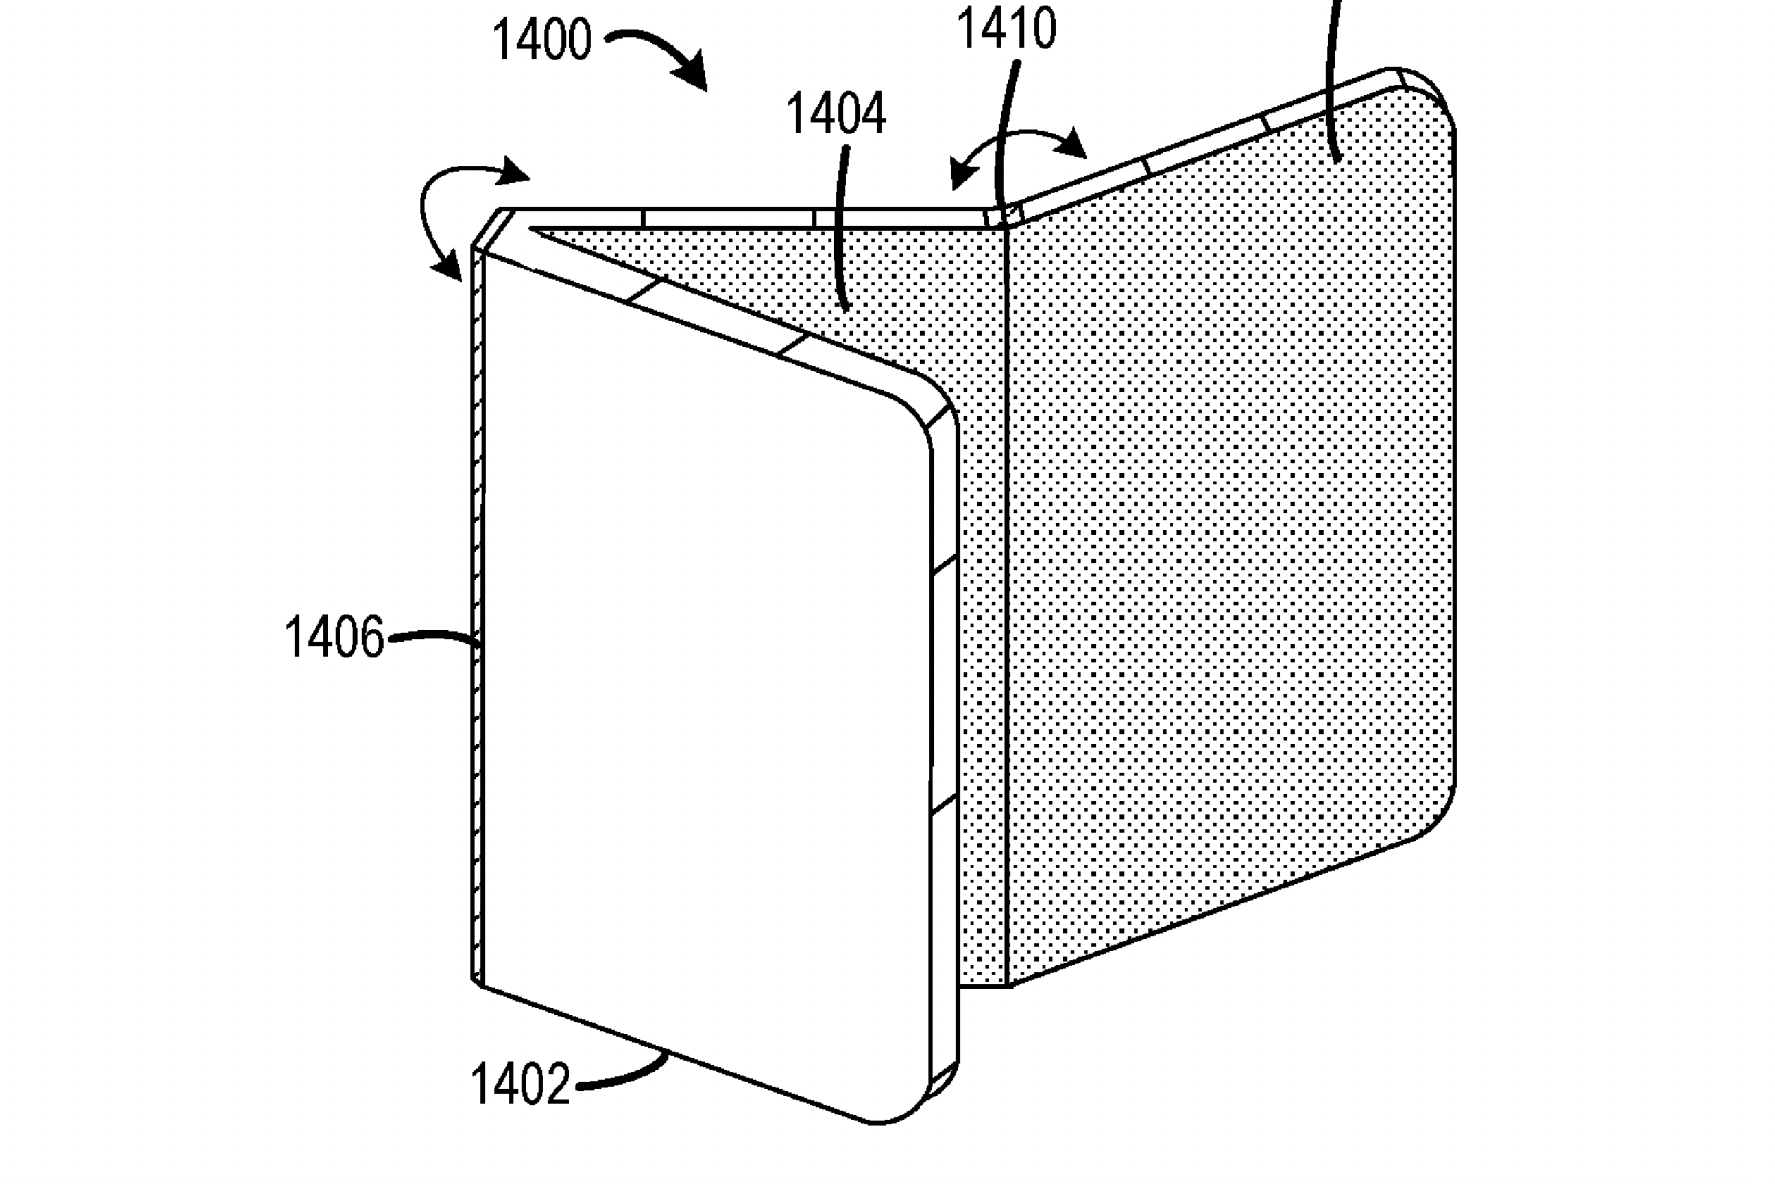 The new Microsoft patent - The Microsoft Surface Duo 3 could actually be a Trio with a double-folding design